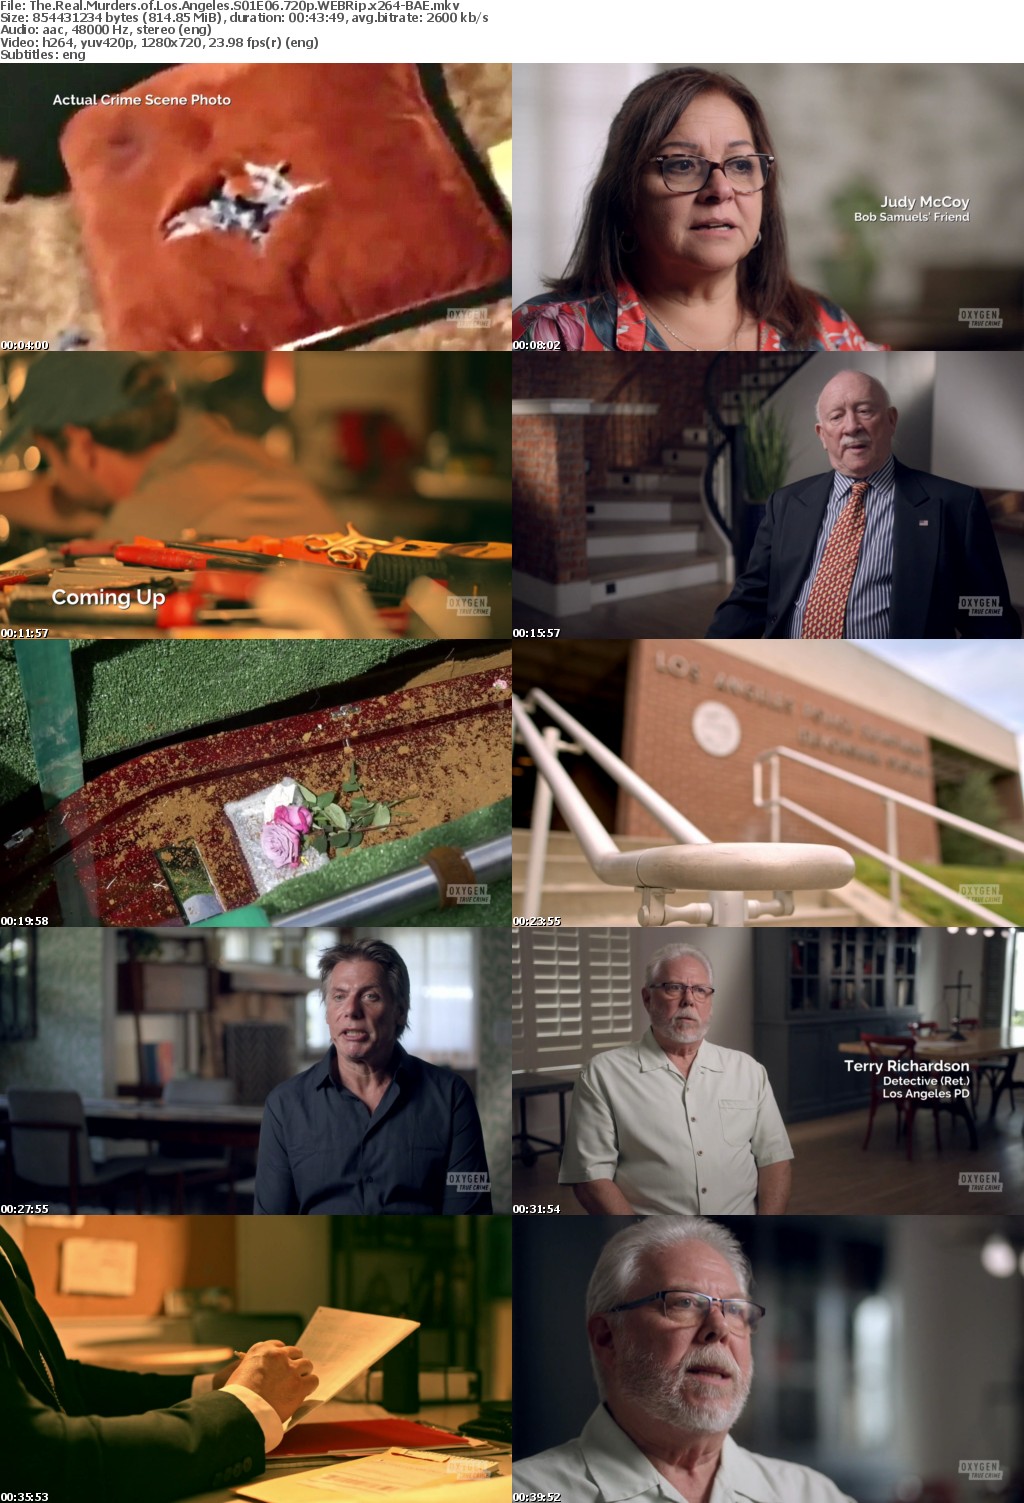 The Real Murders of Los Angeles S01E06 720p WEBRip x264-BAE